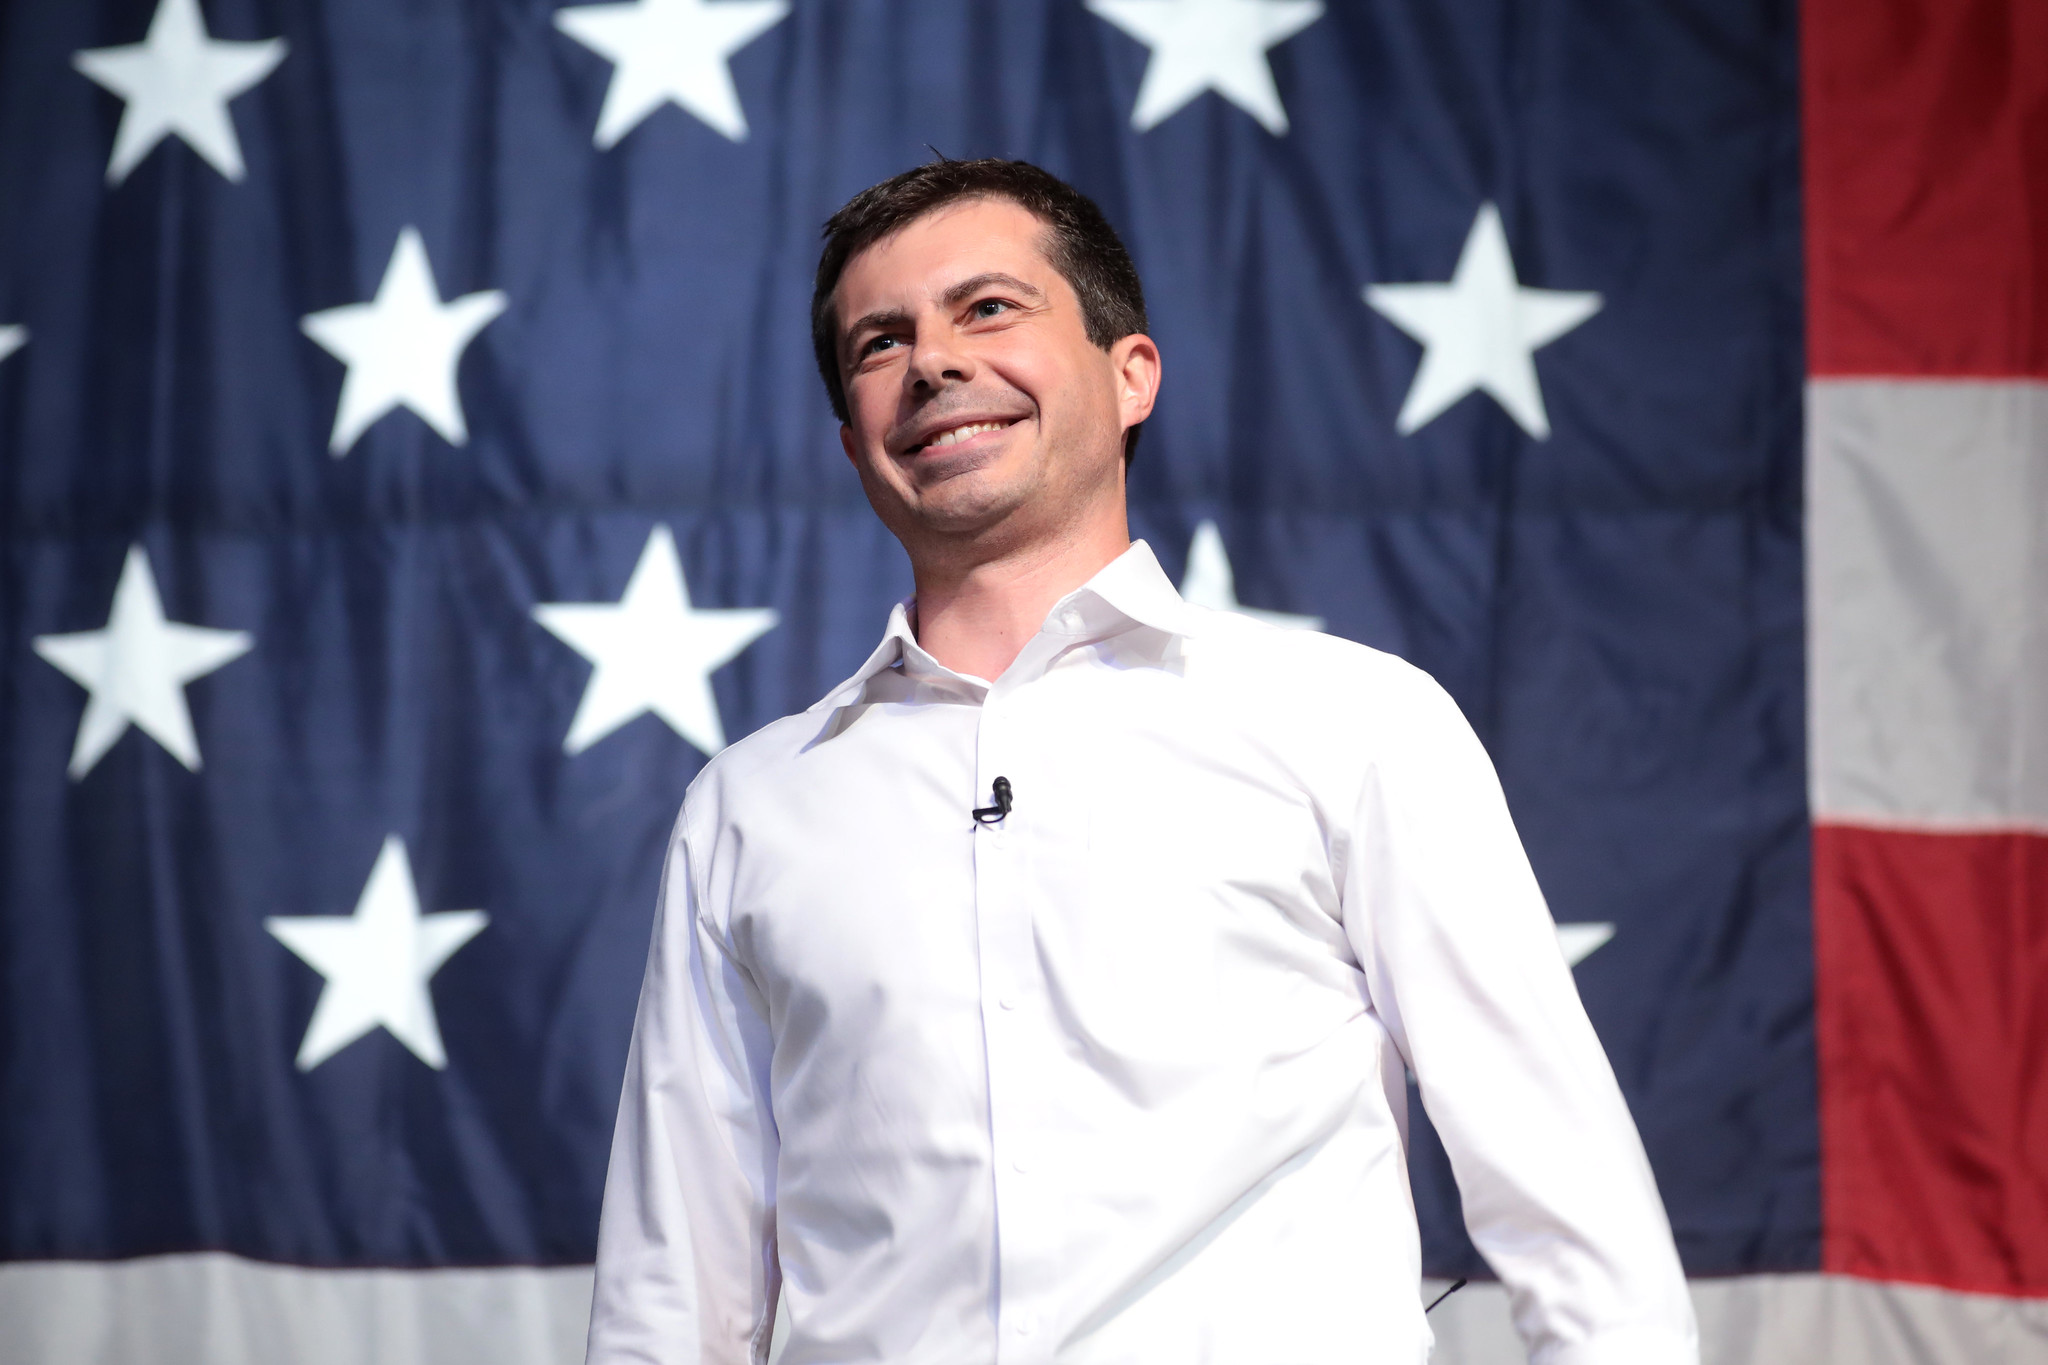 Democratic candidate Pete Buttigieg smiling in front of a U.S. flag.